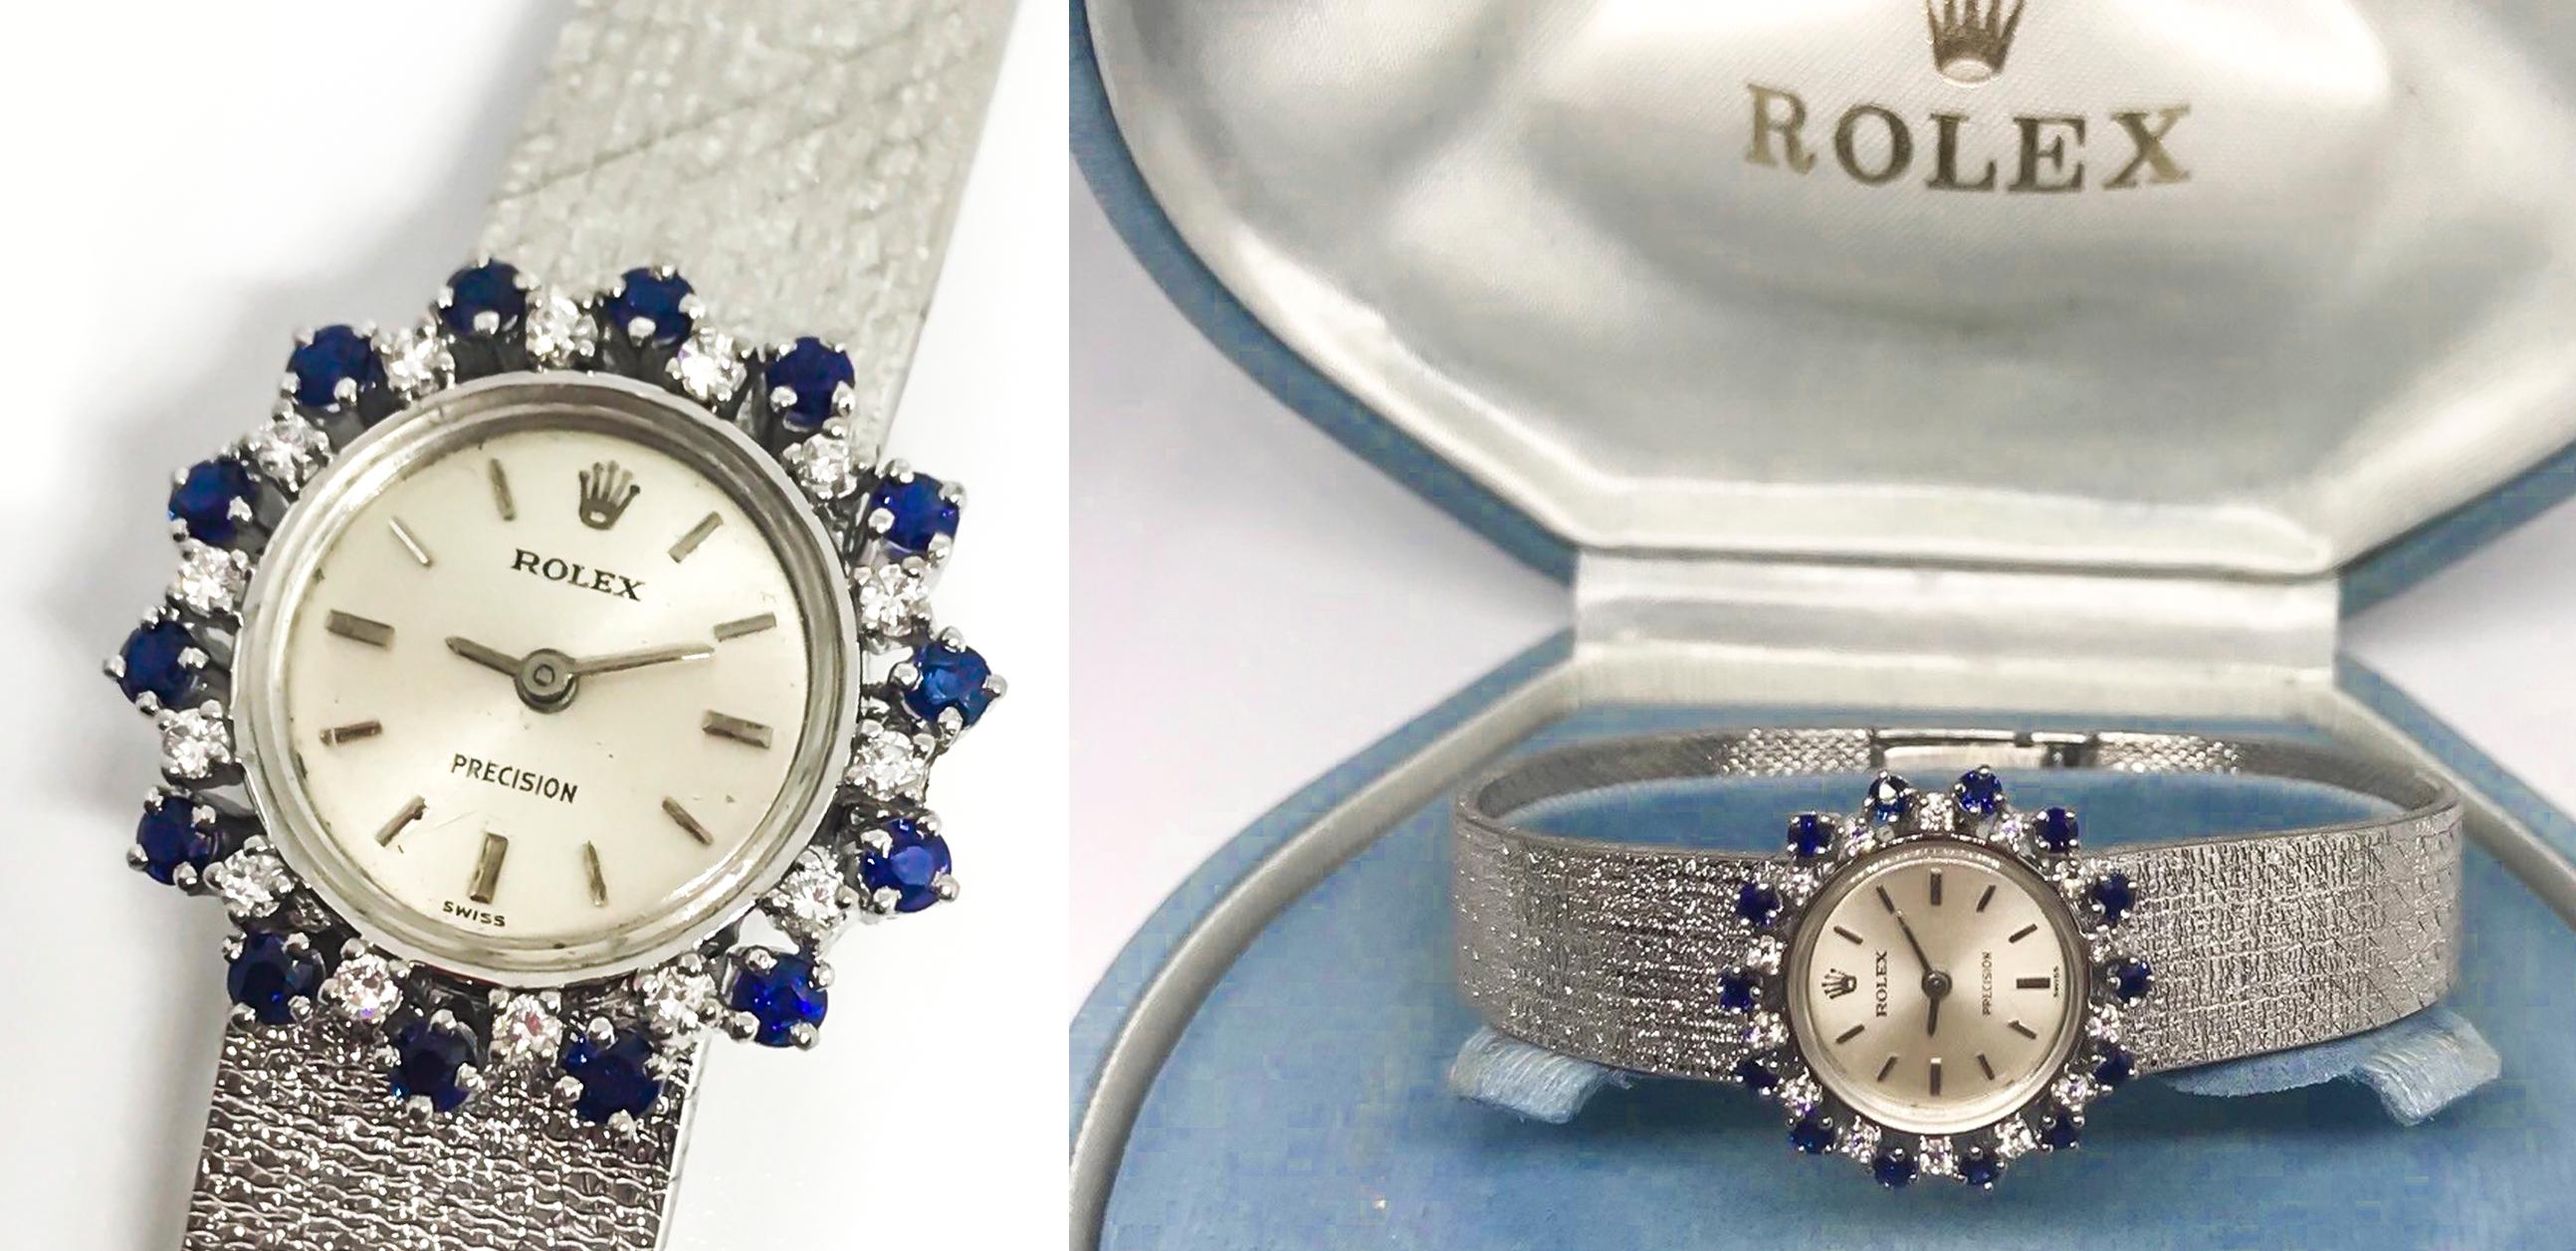 The present timepiece, a 1960s Rolex Sapphire 18 Kt White Gold Wristwatch with original presentation box is in excellent working condition. The watch is fully signed & hallmarked throughout the case, dial & movement. During this time period Rolex